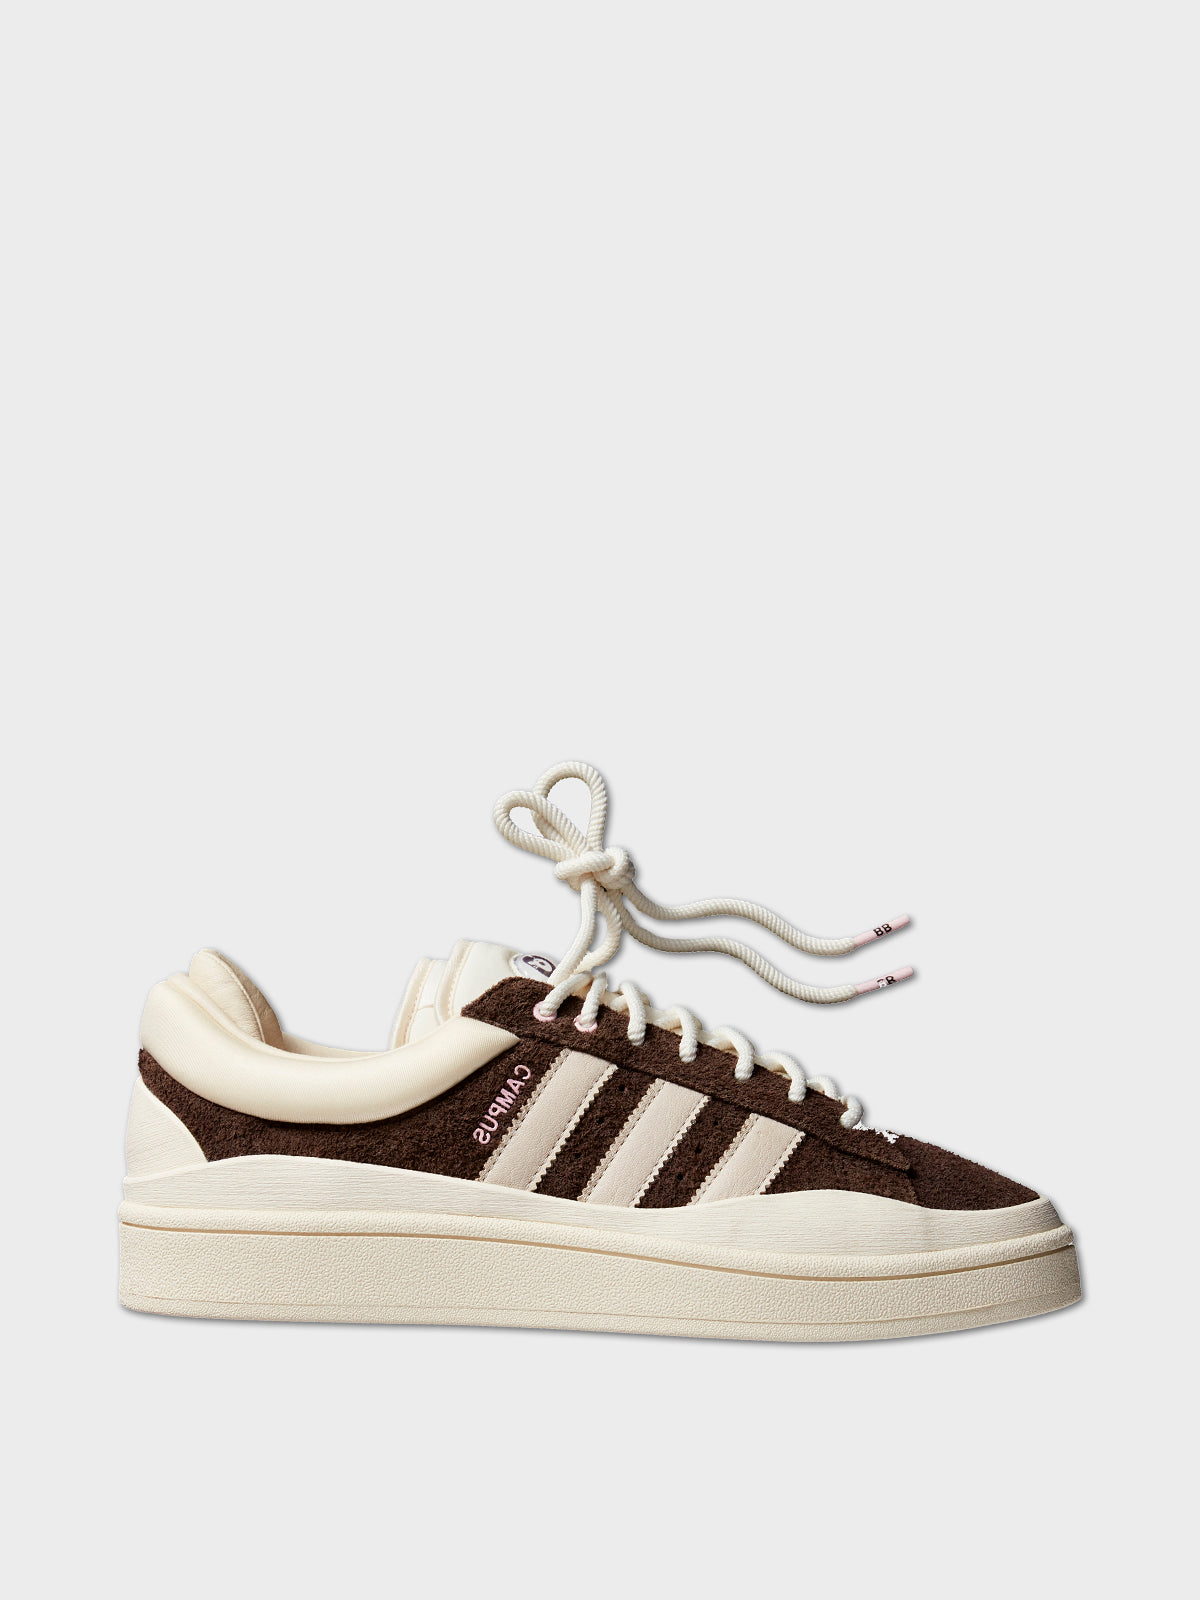 Adidas - Bad Bunny Last Campus Sneakers in Brown and White